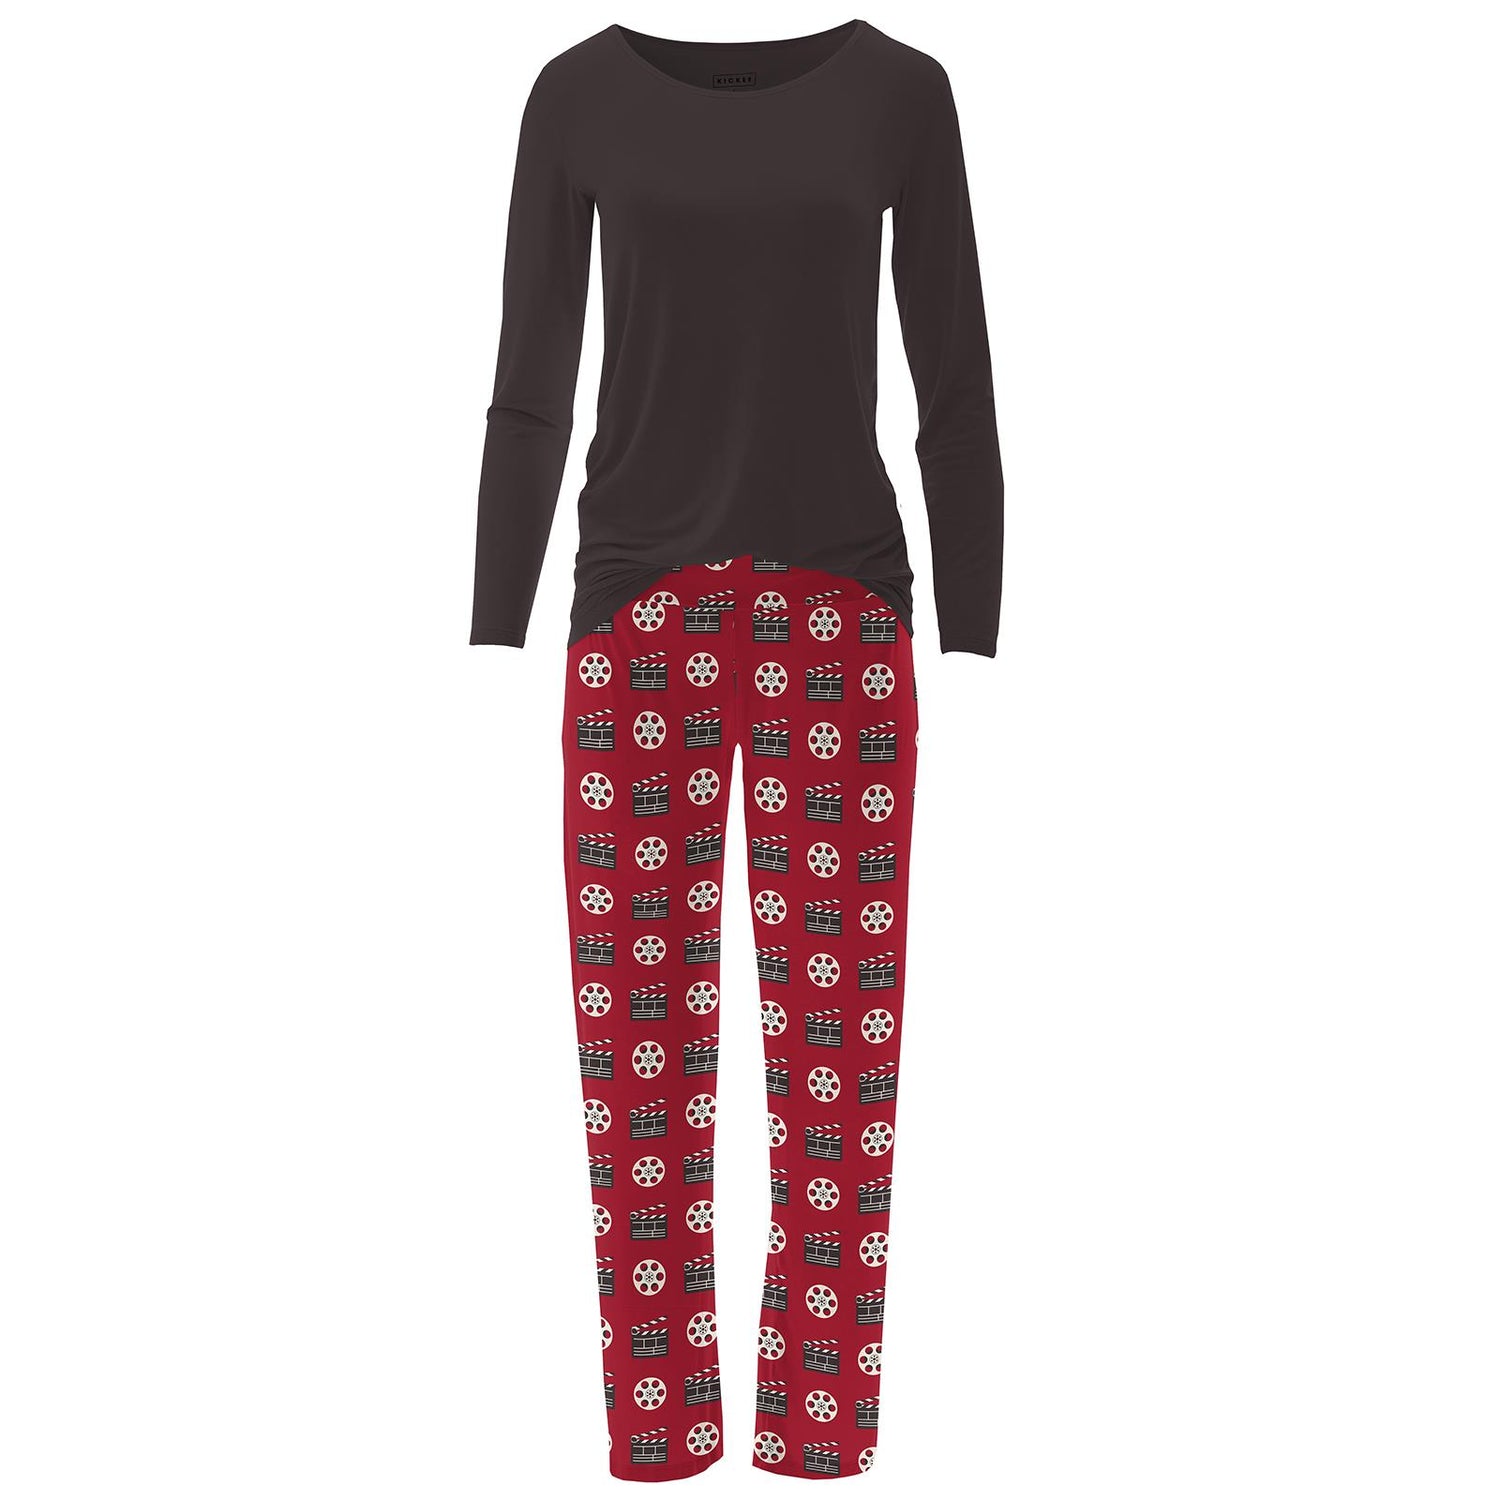 Women's Long Sleeve Loosey Goosey Tee & Pajama Pants Set in Candy Apple Clapper Board and Film